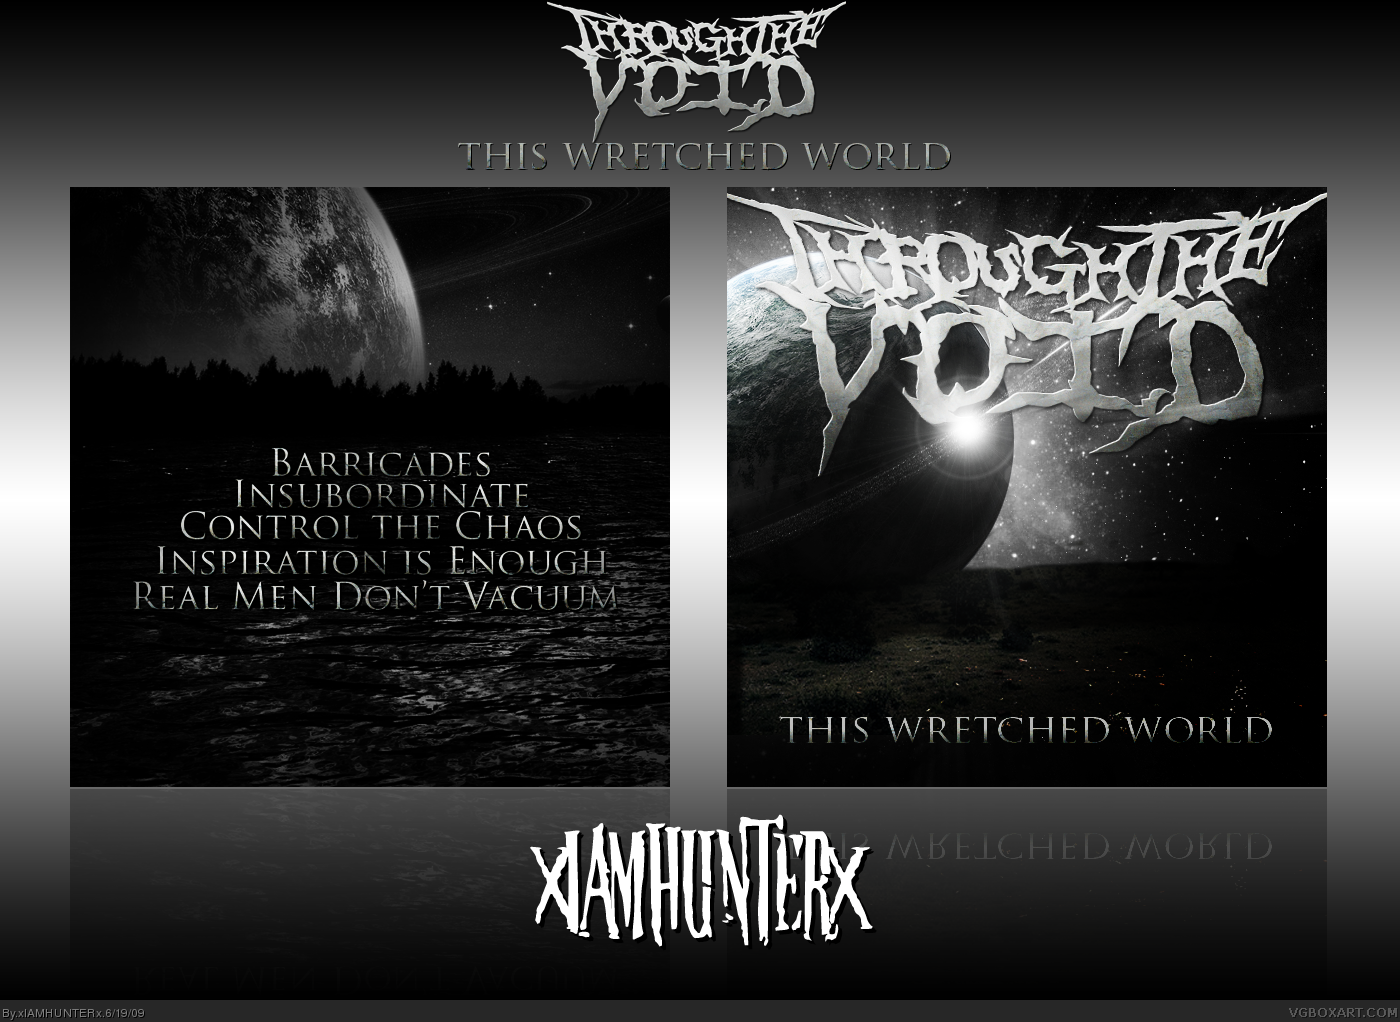 Through The Void: This Wretched World EP box cover